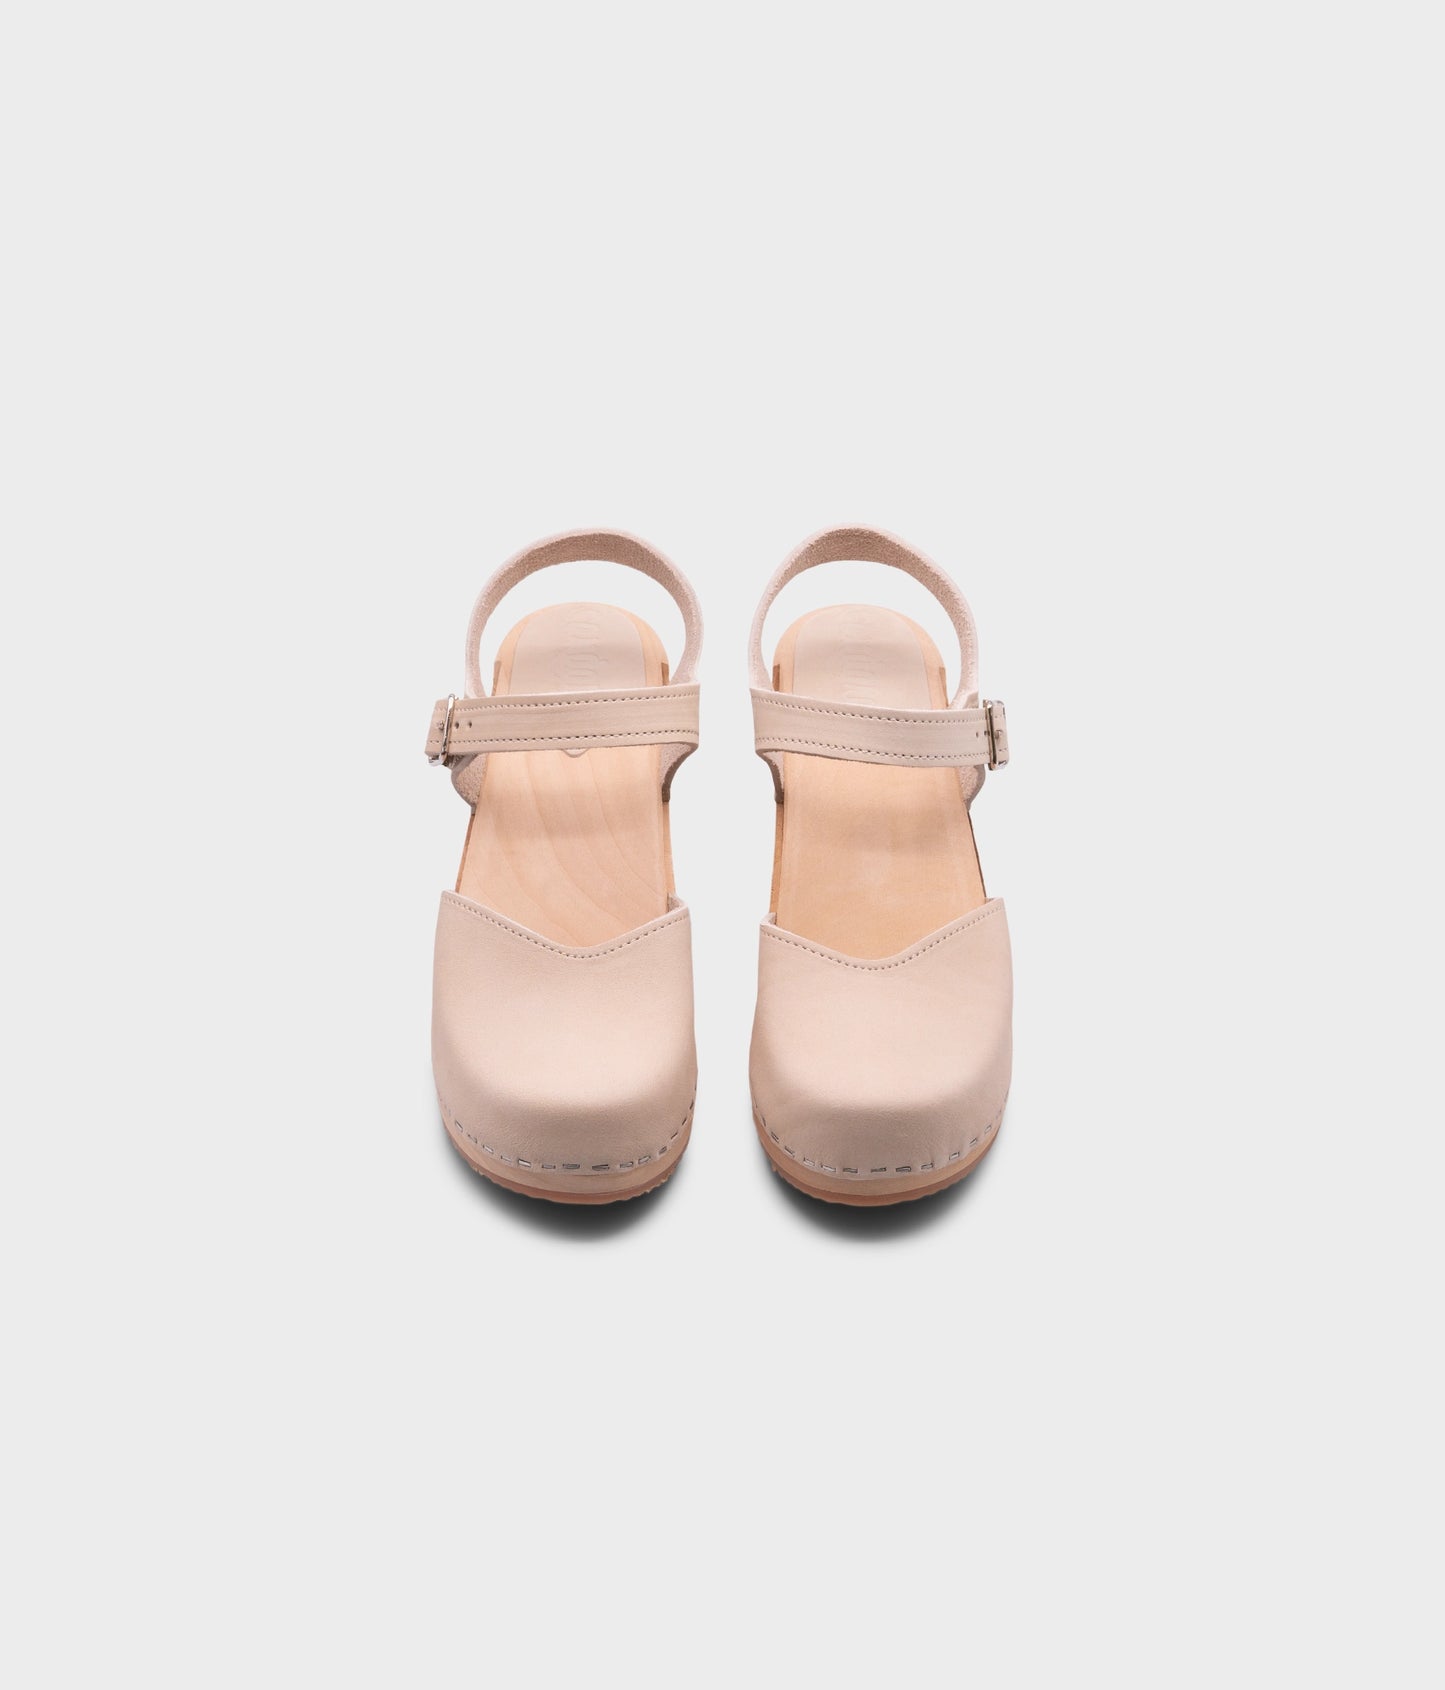 high heeled closed-toe clog sandal in sand white nubuck leather stapled on a light wooden base